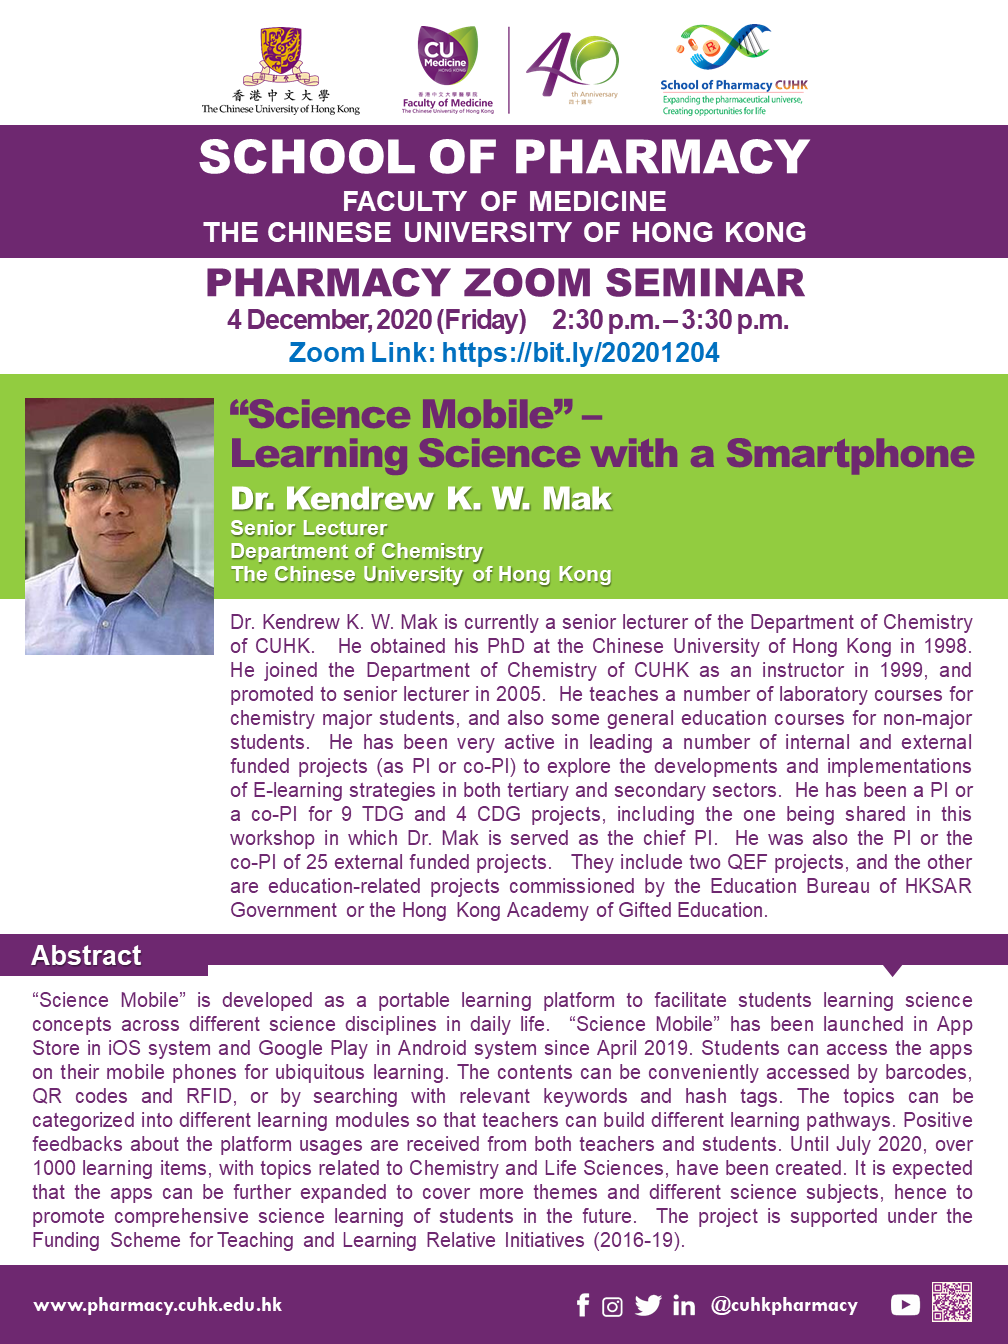 Pharmacy Seminar -  “Science Mobile” – Learning Science with a Smartphone by Dr. Kendrew K. W. Mak